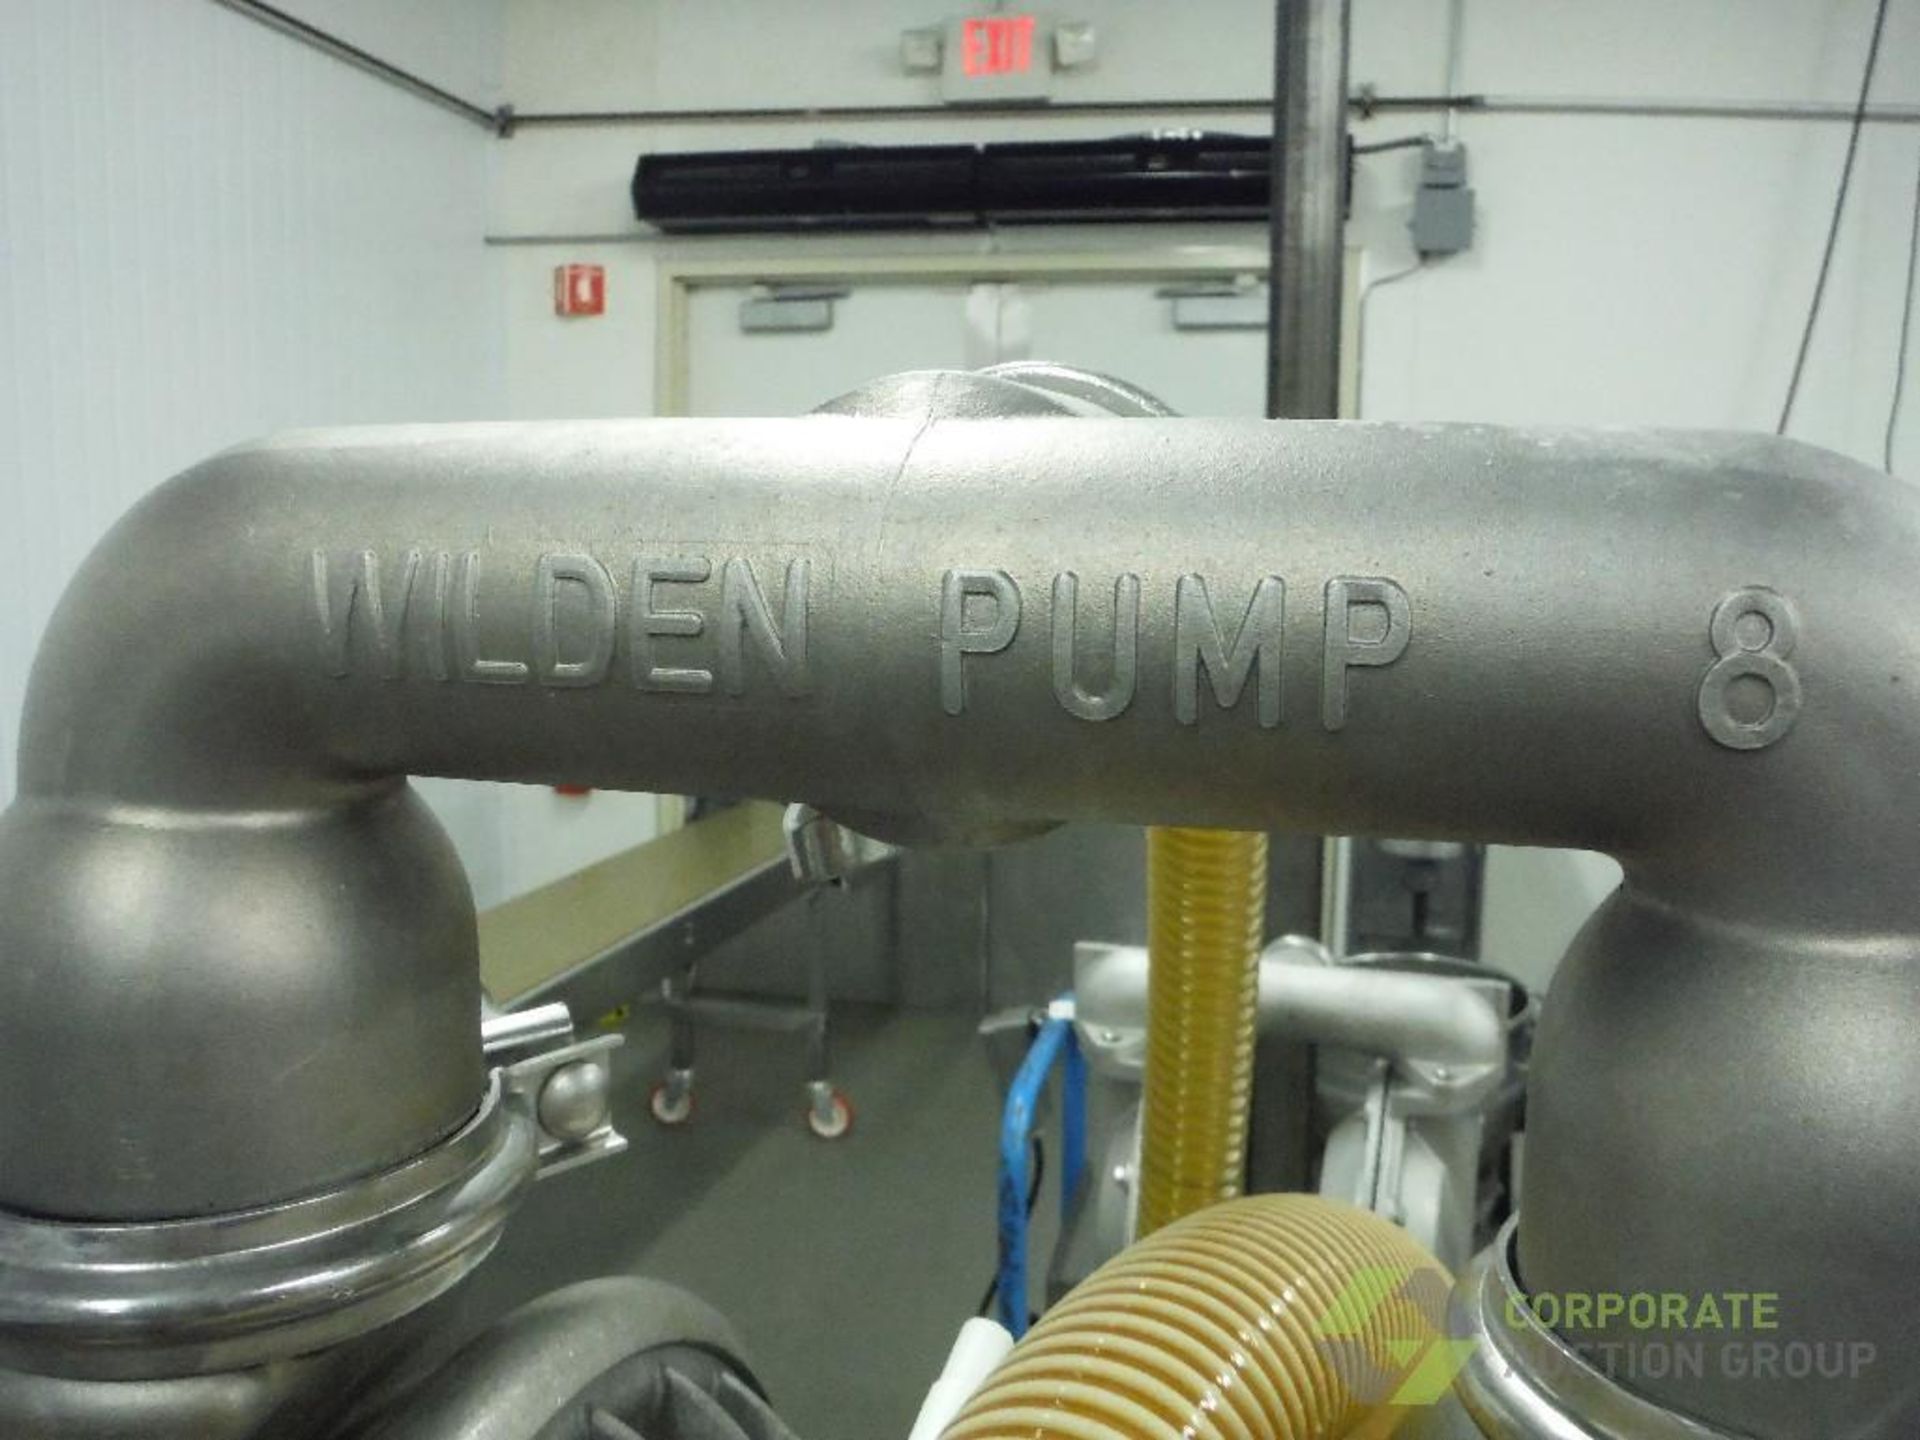 SS Wilden diaphragm pump, 10 in. dia, on SS cart - Image 3 of 4